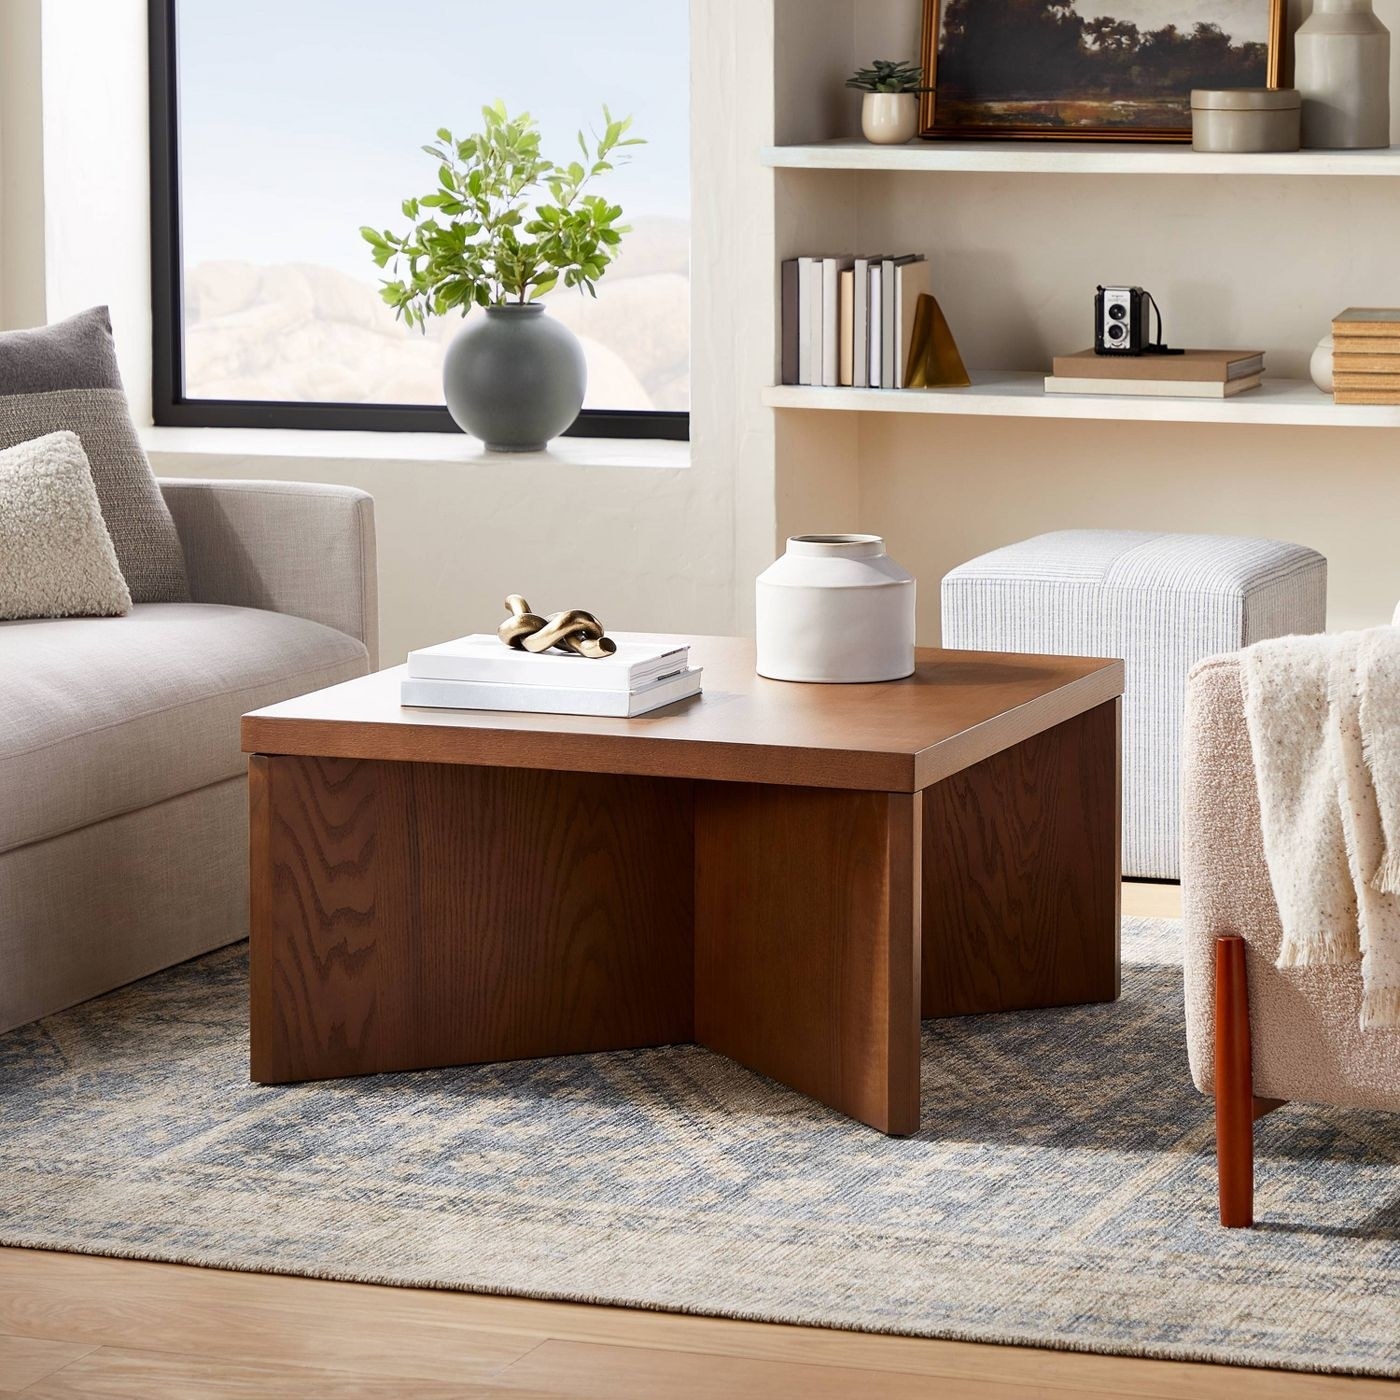 The coffee table pictured in brown